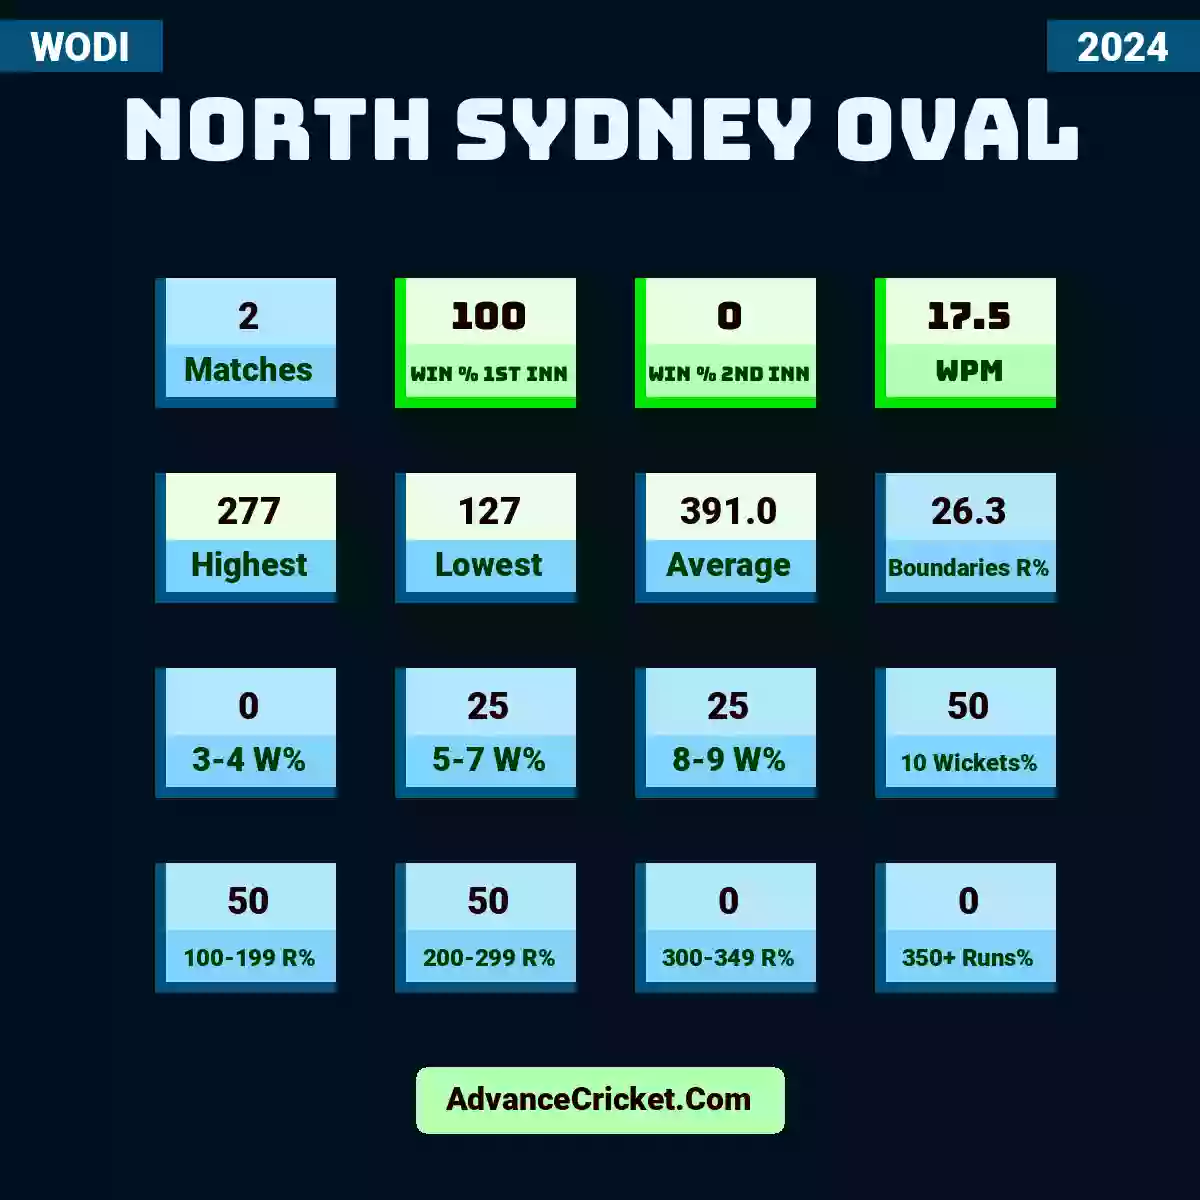 Image showing North Sydney Oval with Matches: 2, Win % 1st Inn: 100, Win % 2nd Inn: 0, WPM: 17.5, Highest: 277, Lowest: 127, Average: 391.0, Boundaries R%: 26.3, 3-4 W%: 0, 5-7 W%: 25, 8-9 W%: 25, 10 Wickets%: 50, 100-199 R%: 50, 200-299 R%: 50, 300-349 R%: 0, 350+ Runs%: 0.